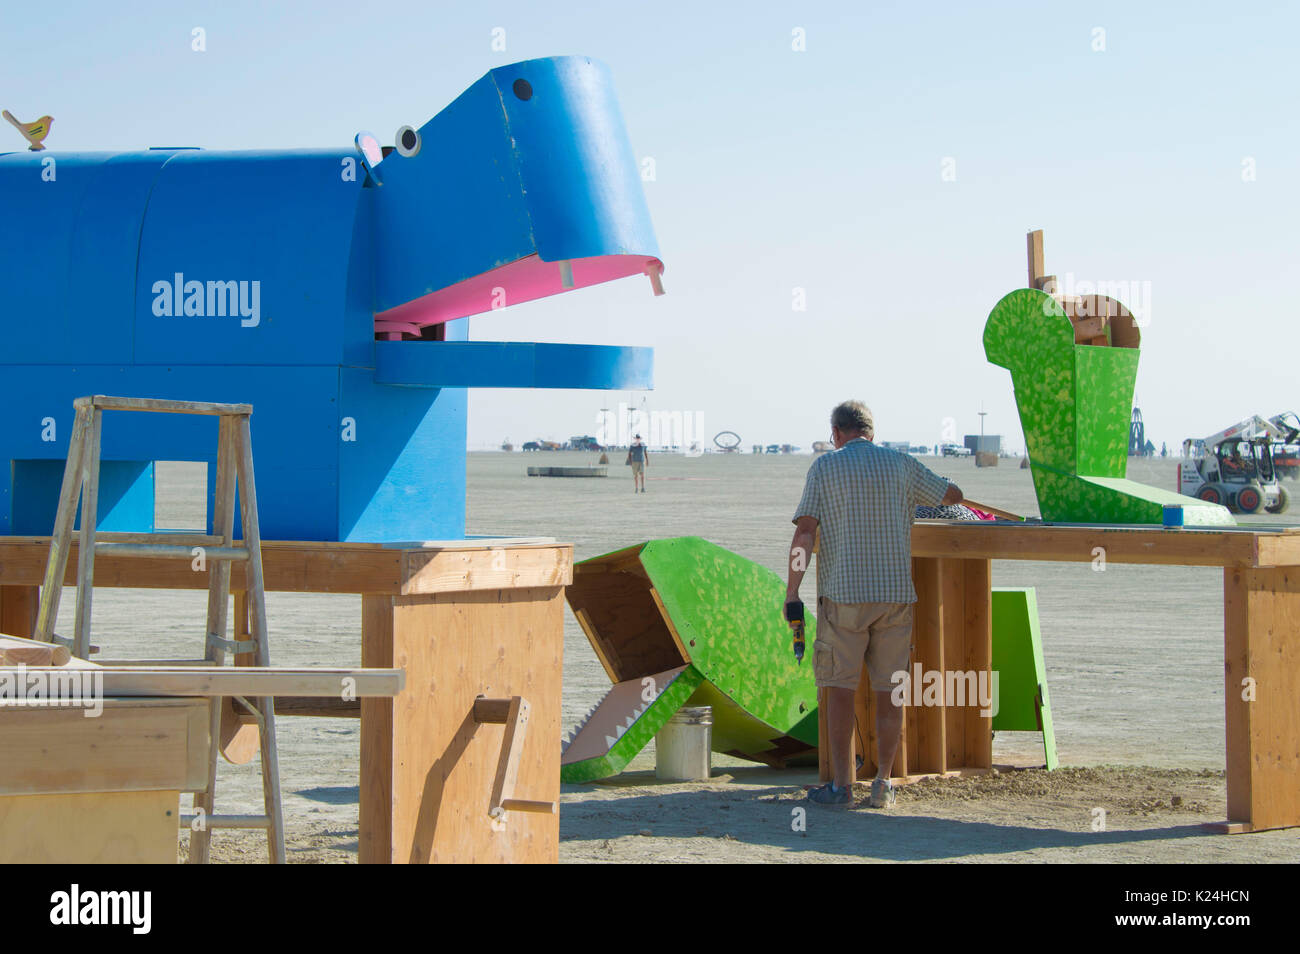 Workers put finishing touches on public art on the playa as the annual desert festival Burning Man is set to begin August 26, 2017 in Black Rock City, Nevada. The annual festival attracts 70,000 attendees in one of the most remote and inhospitable deserts in America. Stock Photo